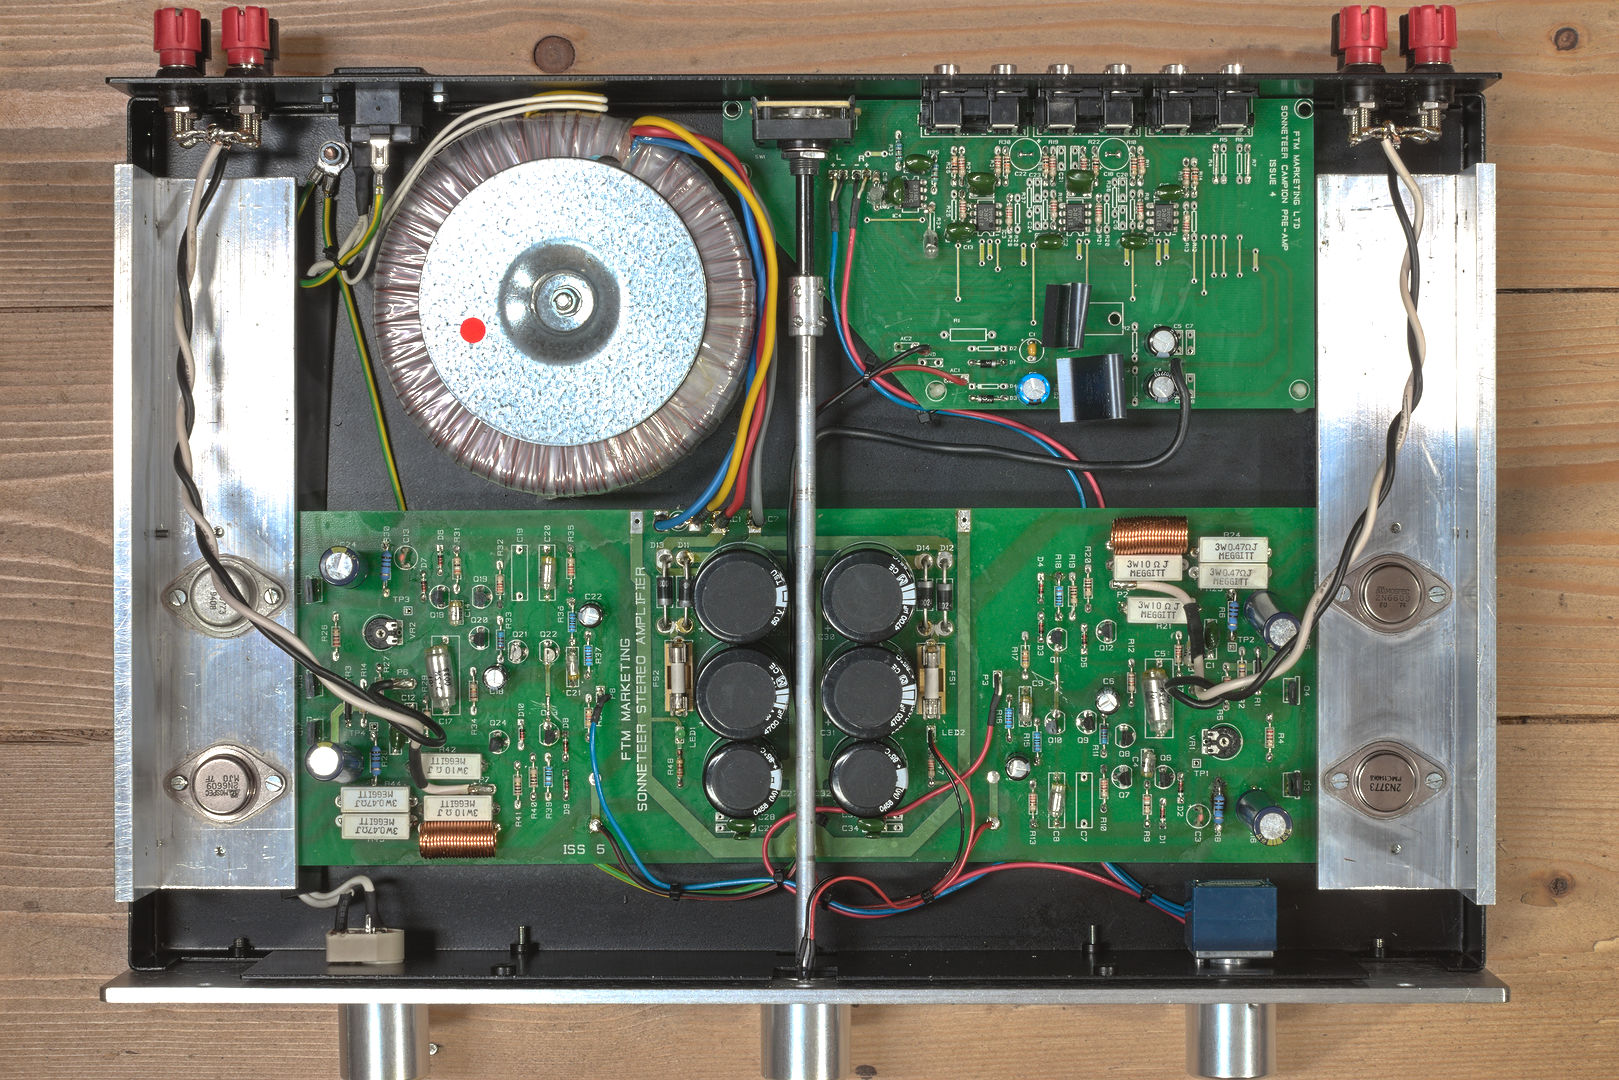 The inside of the amplifier after repair